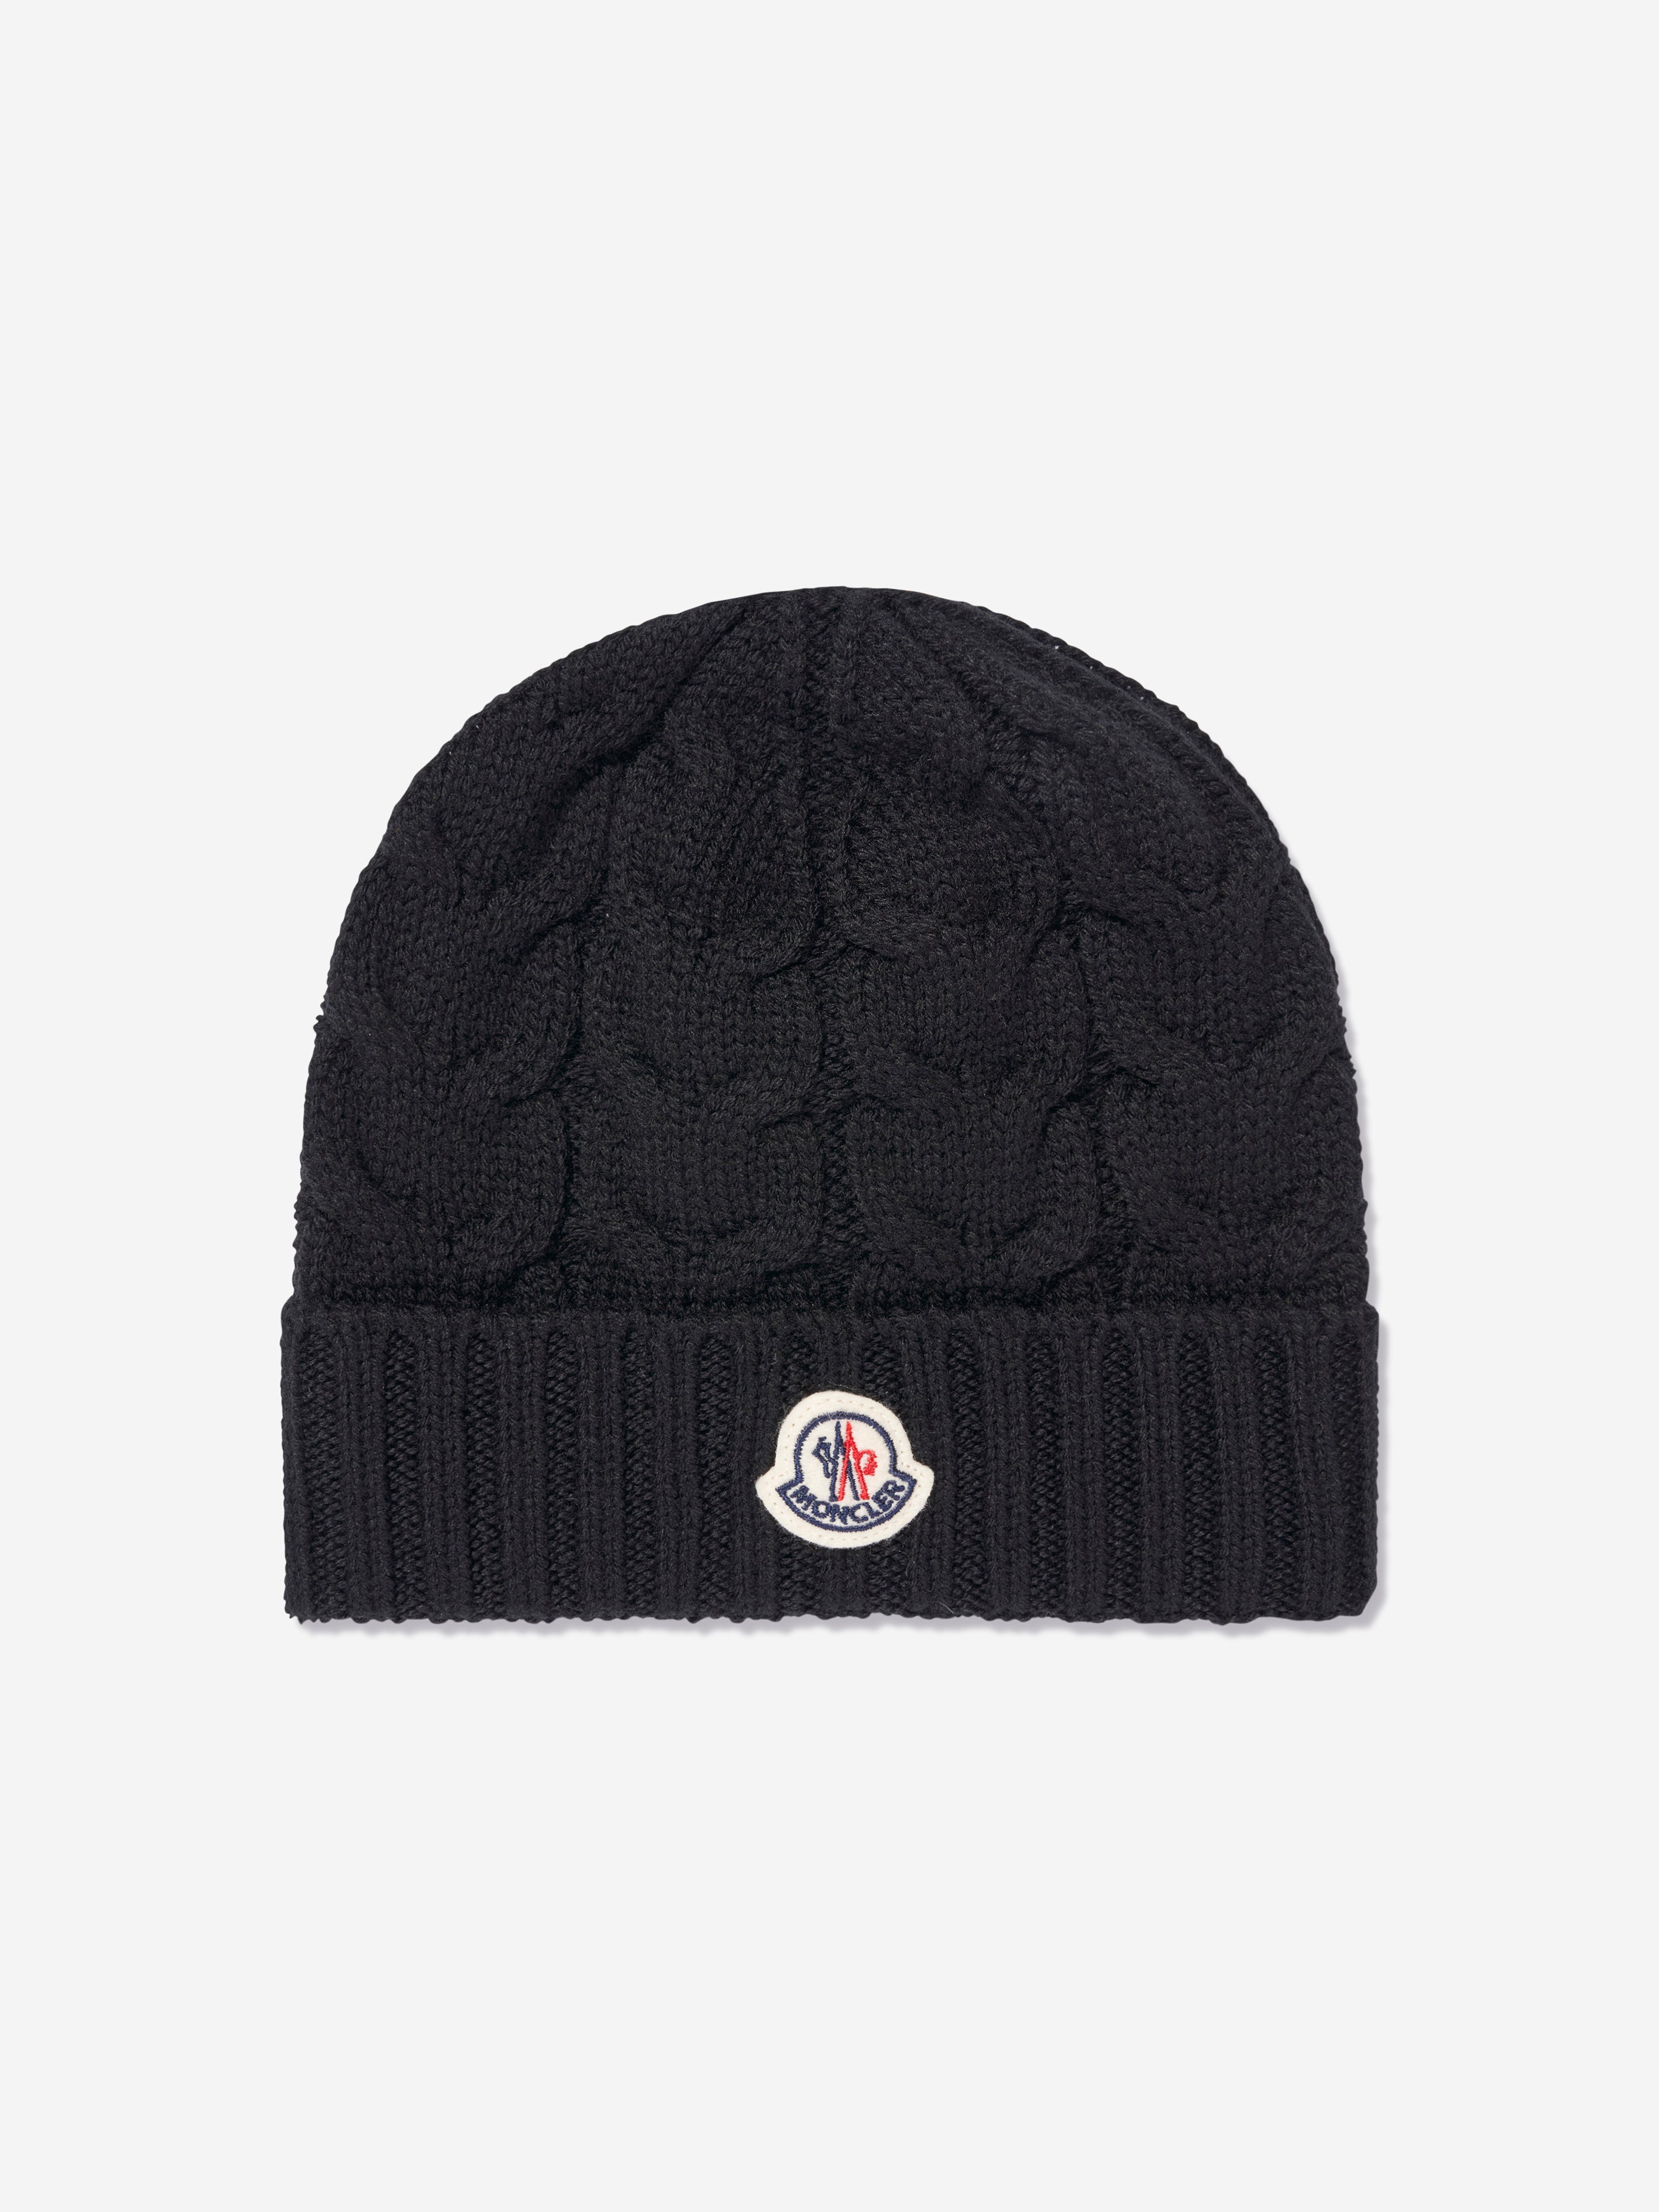 Moncler Enfant Boys Cable Knit Wool Beanie in Black Childsplay Clothing